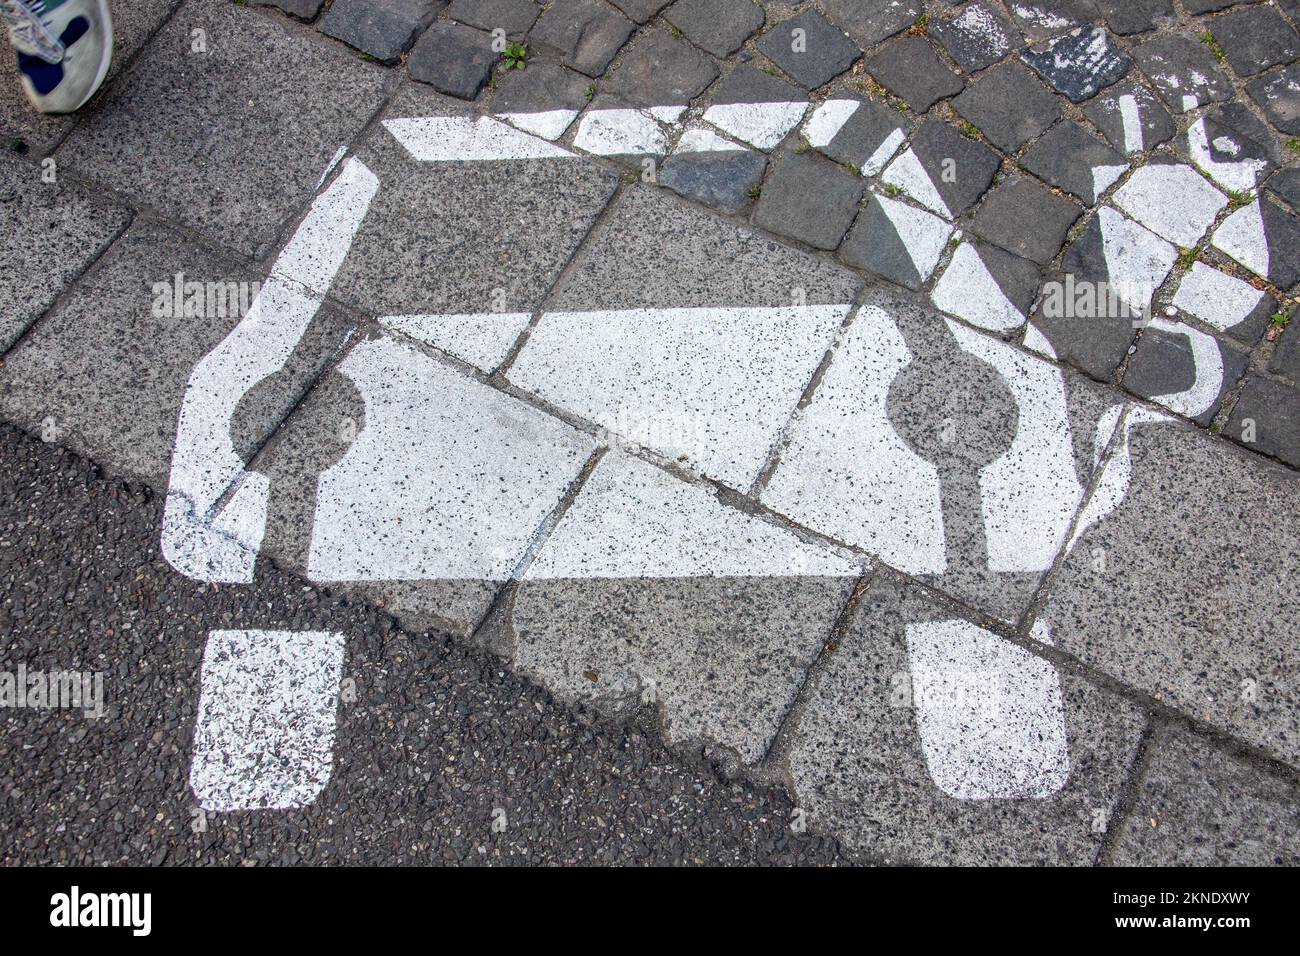 Space reserved for EV electric vehicle charging, Saarbruck, Germany Stock Photo